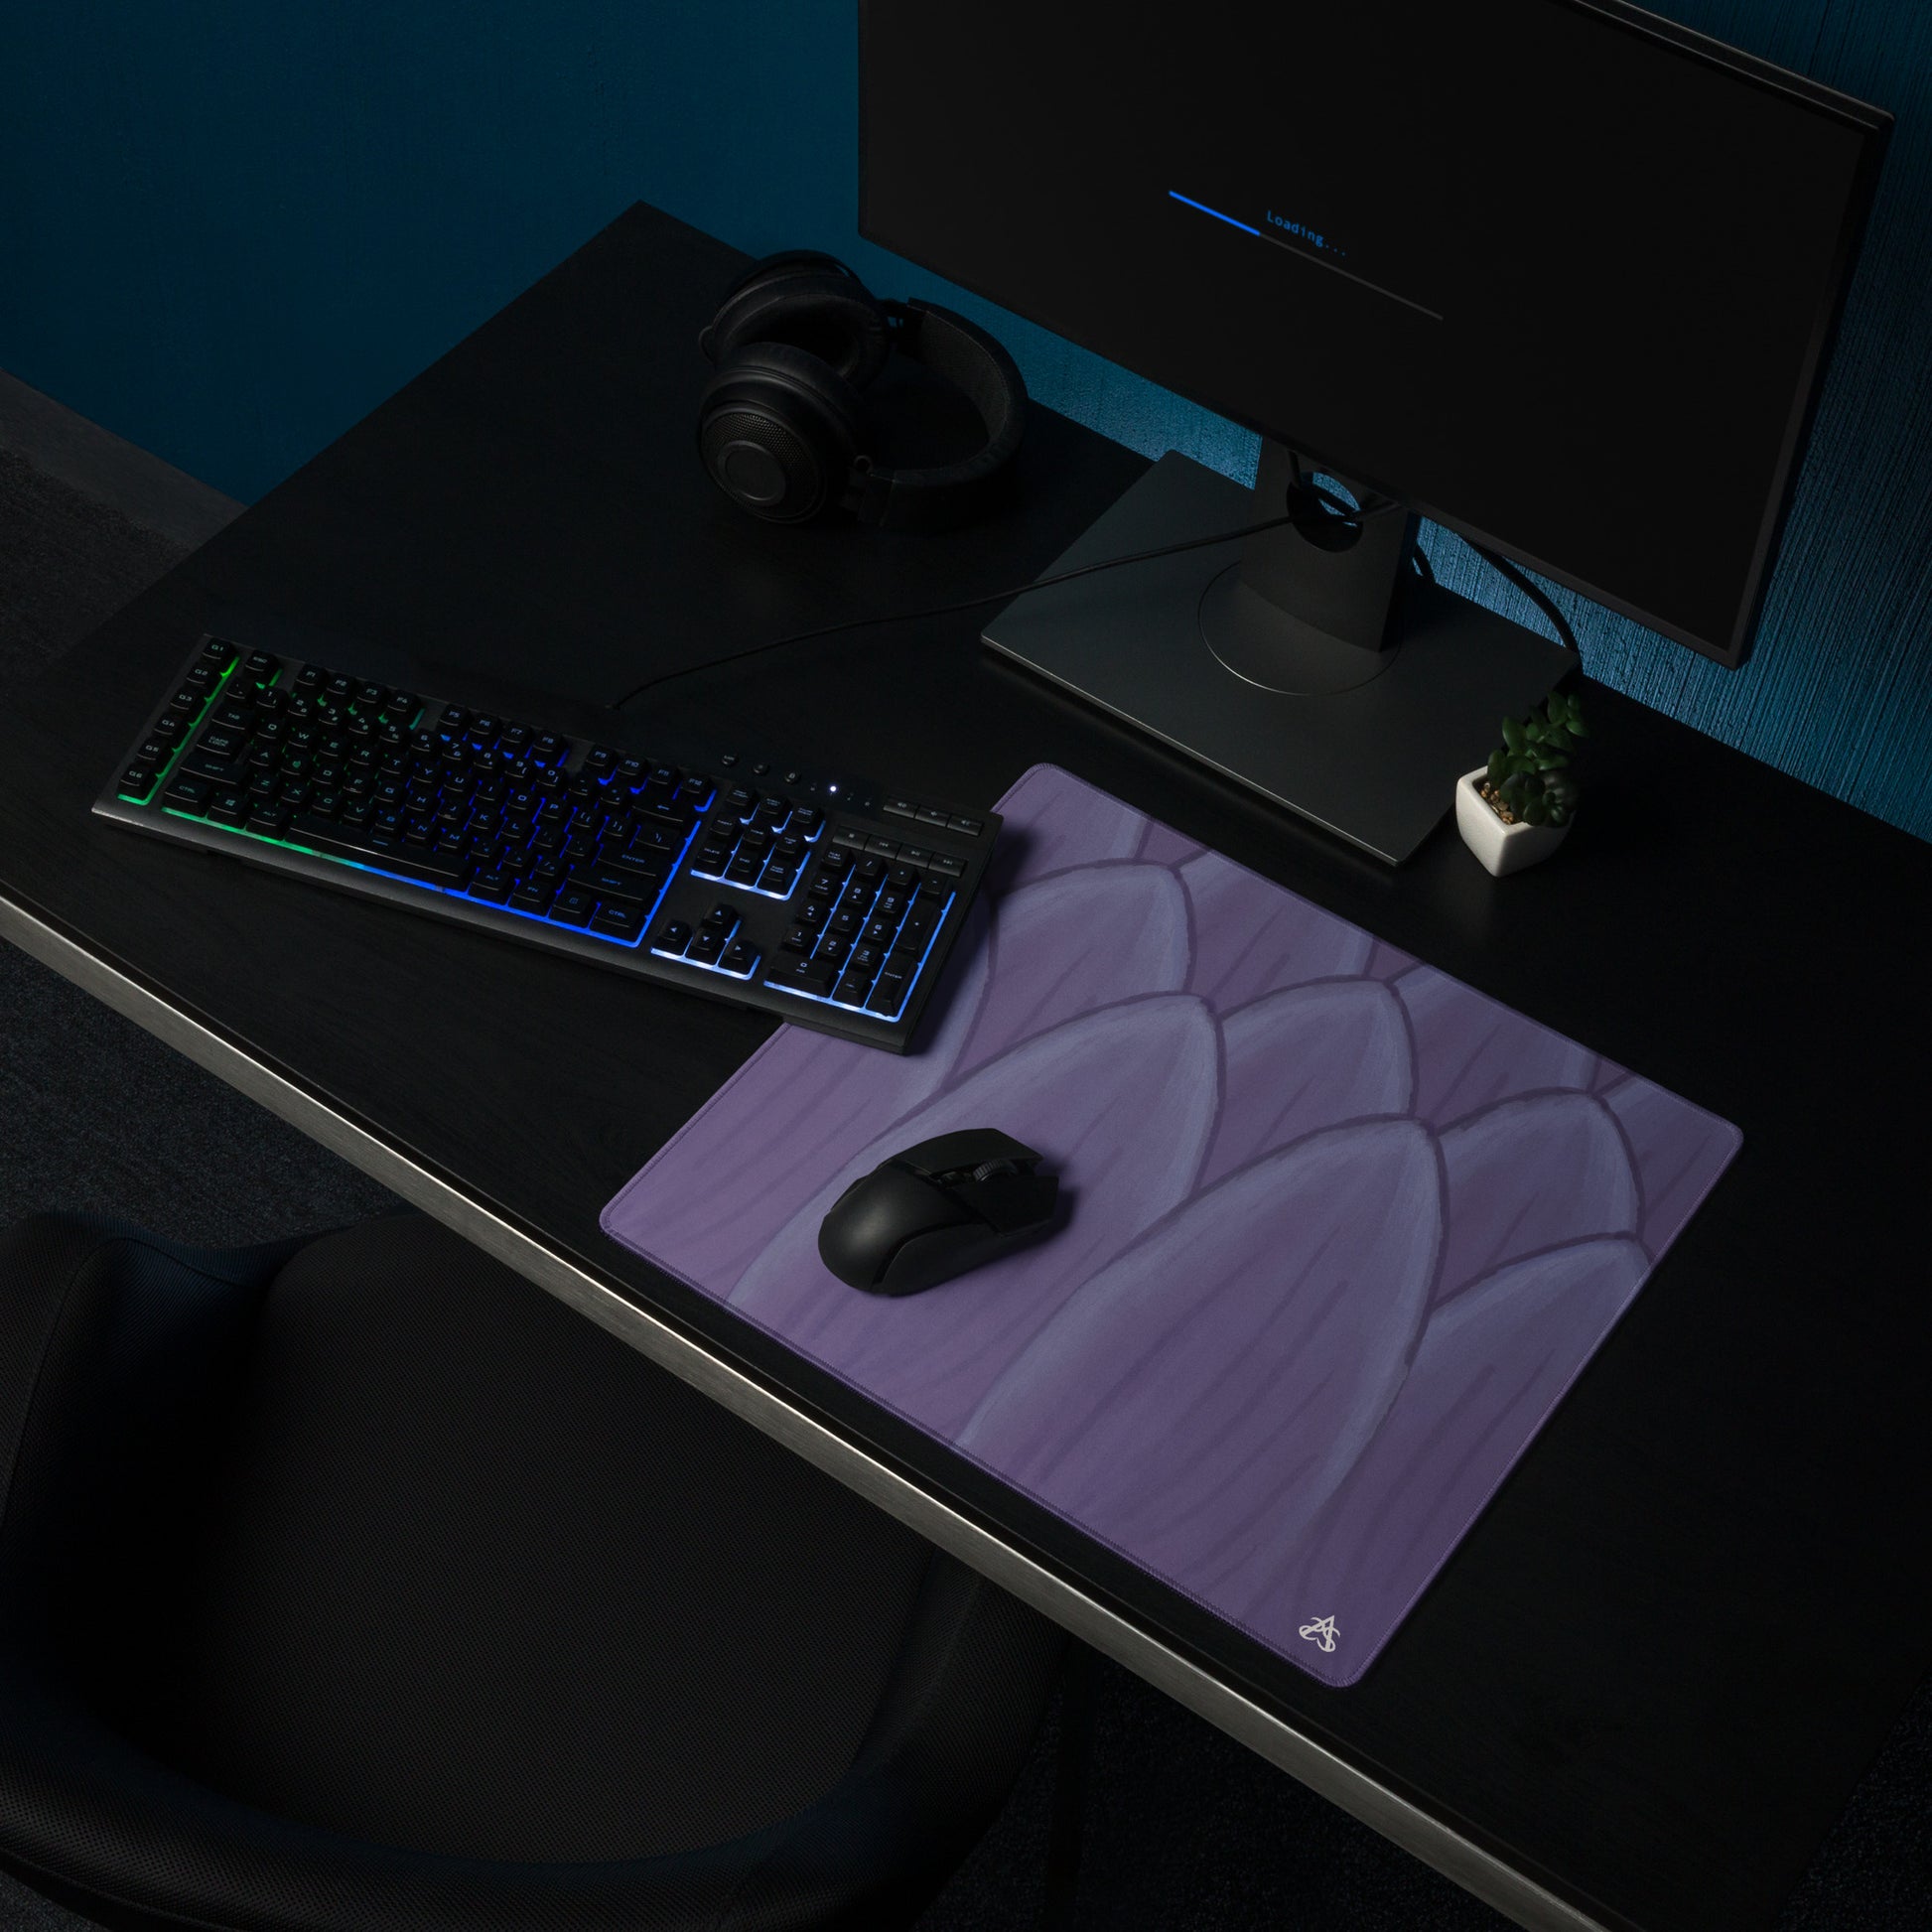 An 18 by 16 inch version of the Lotus Petals desk mat with lavender painted lotus petals.